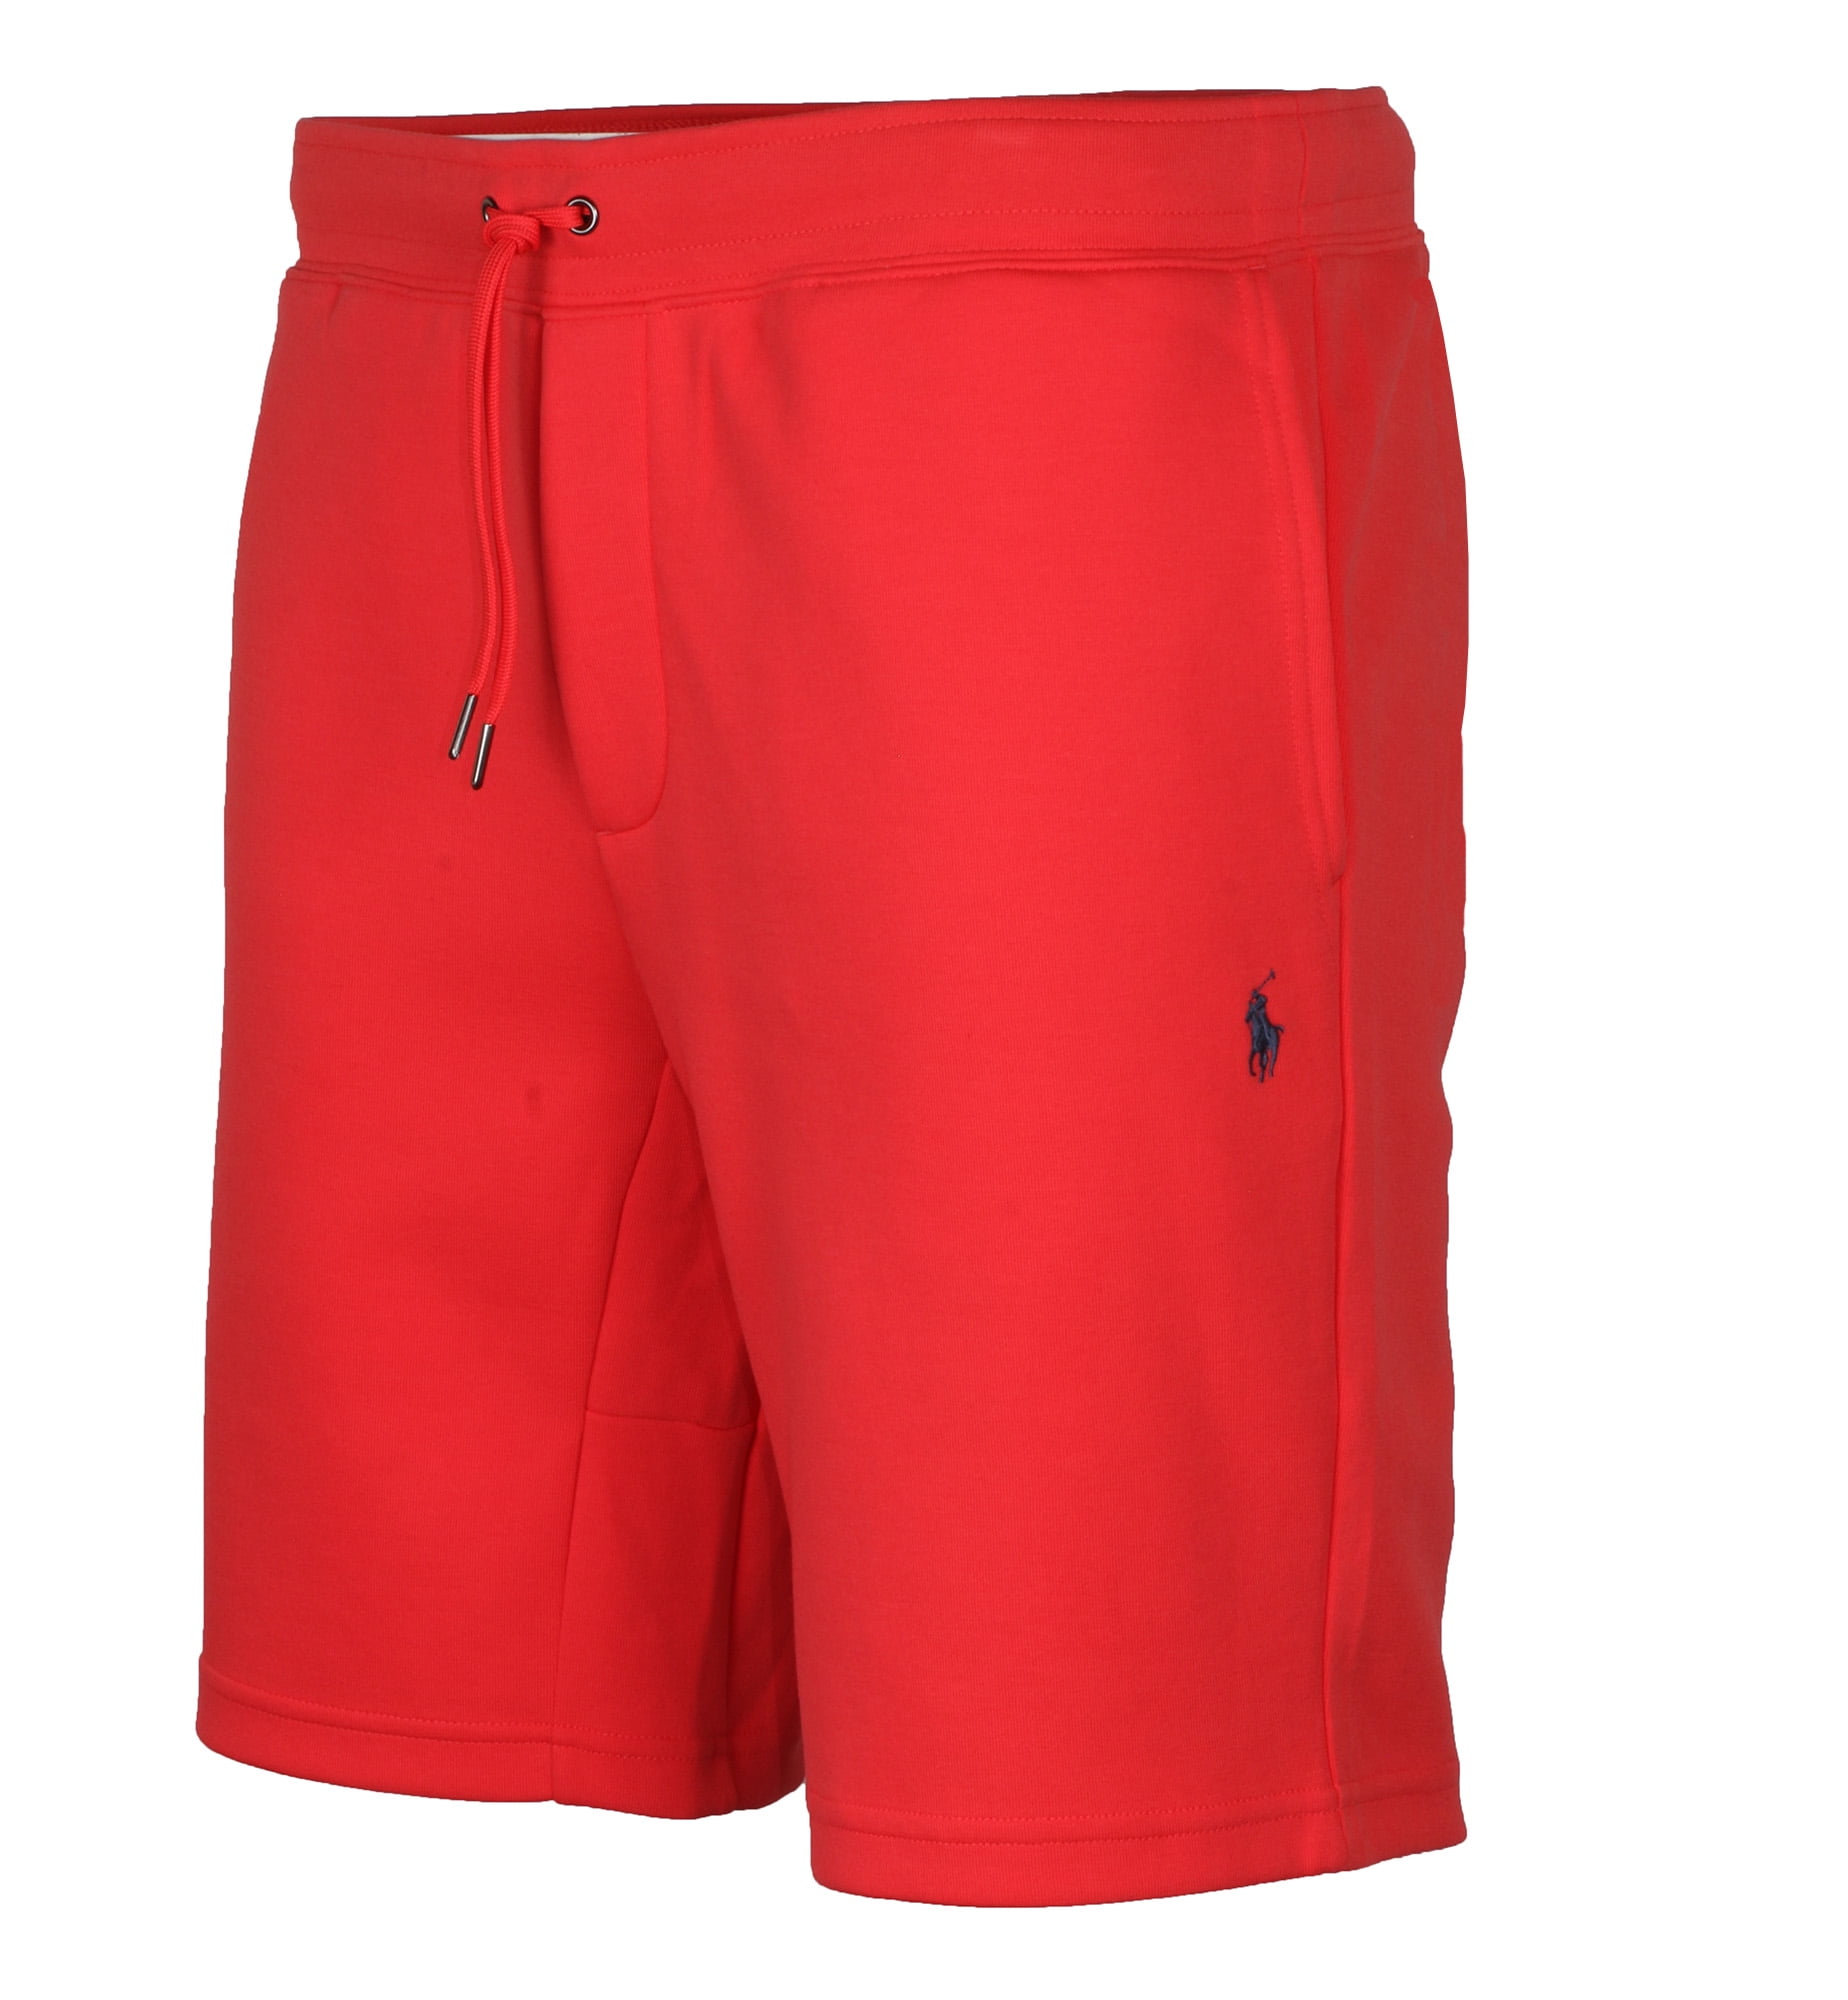 Polo RL Men's Double Knit Shorts (Red, Small)